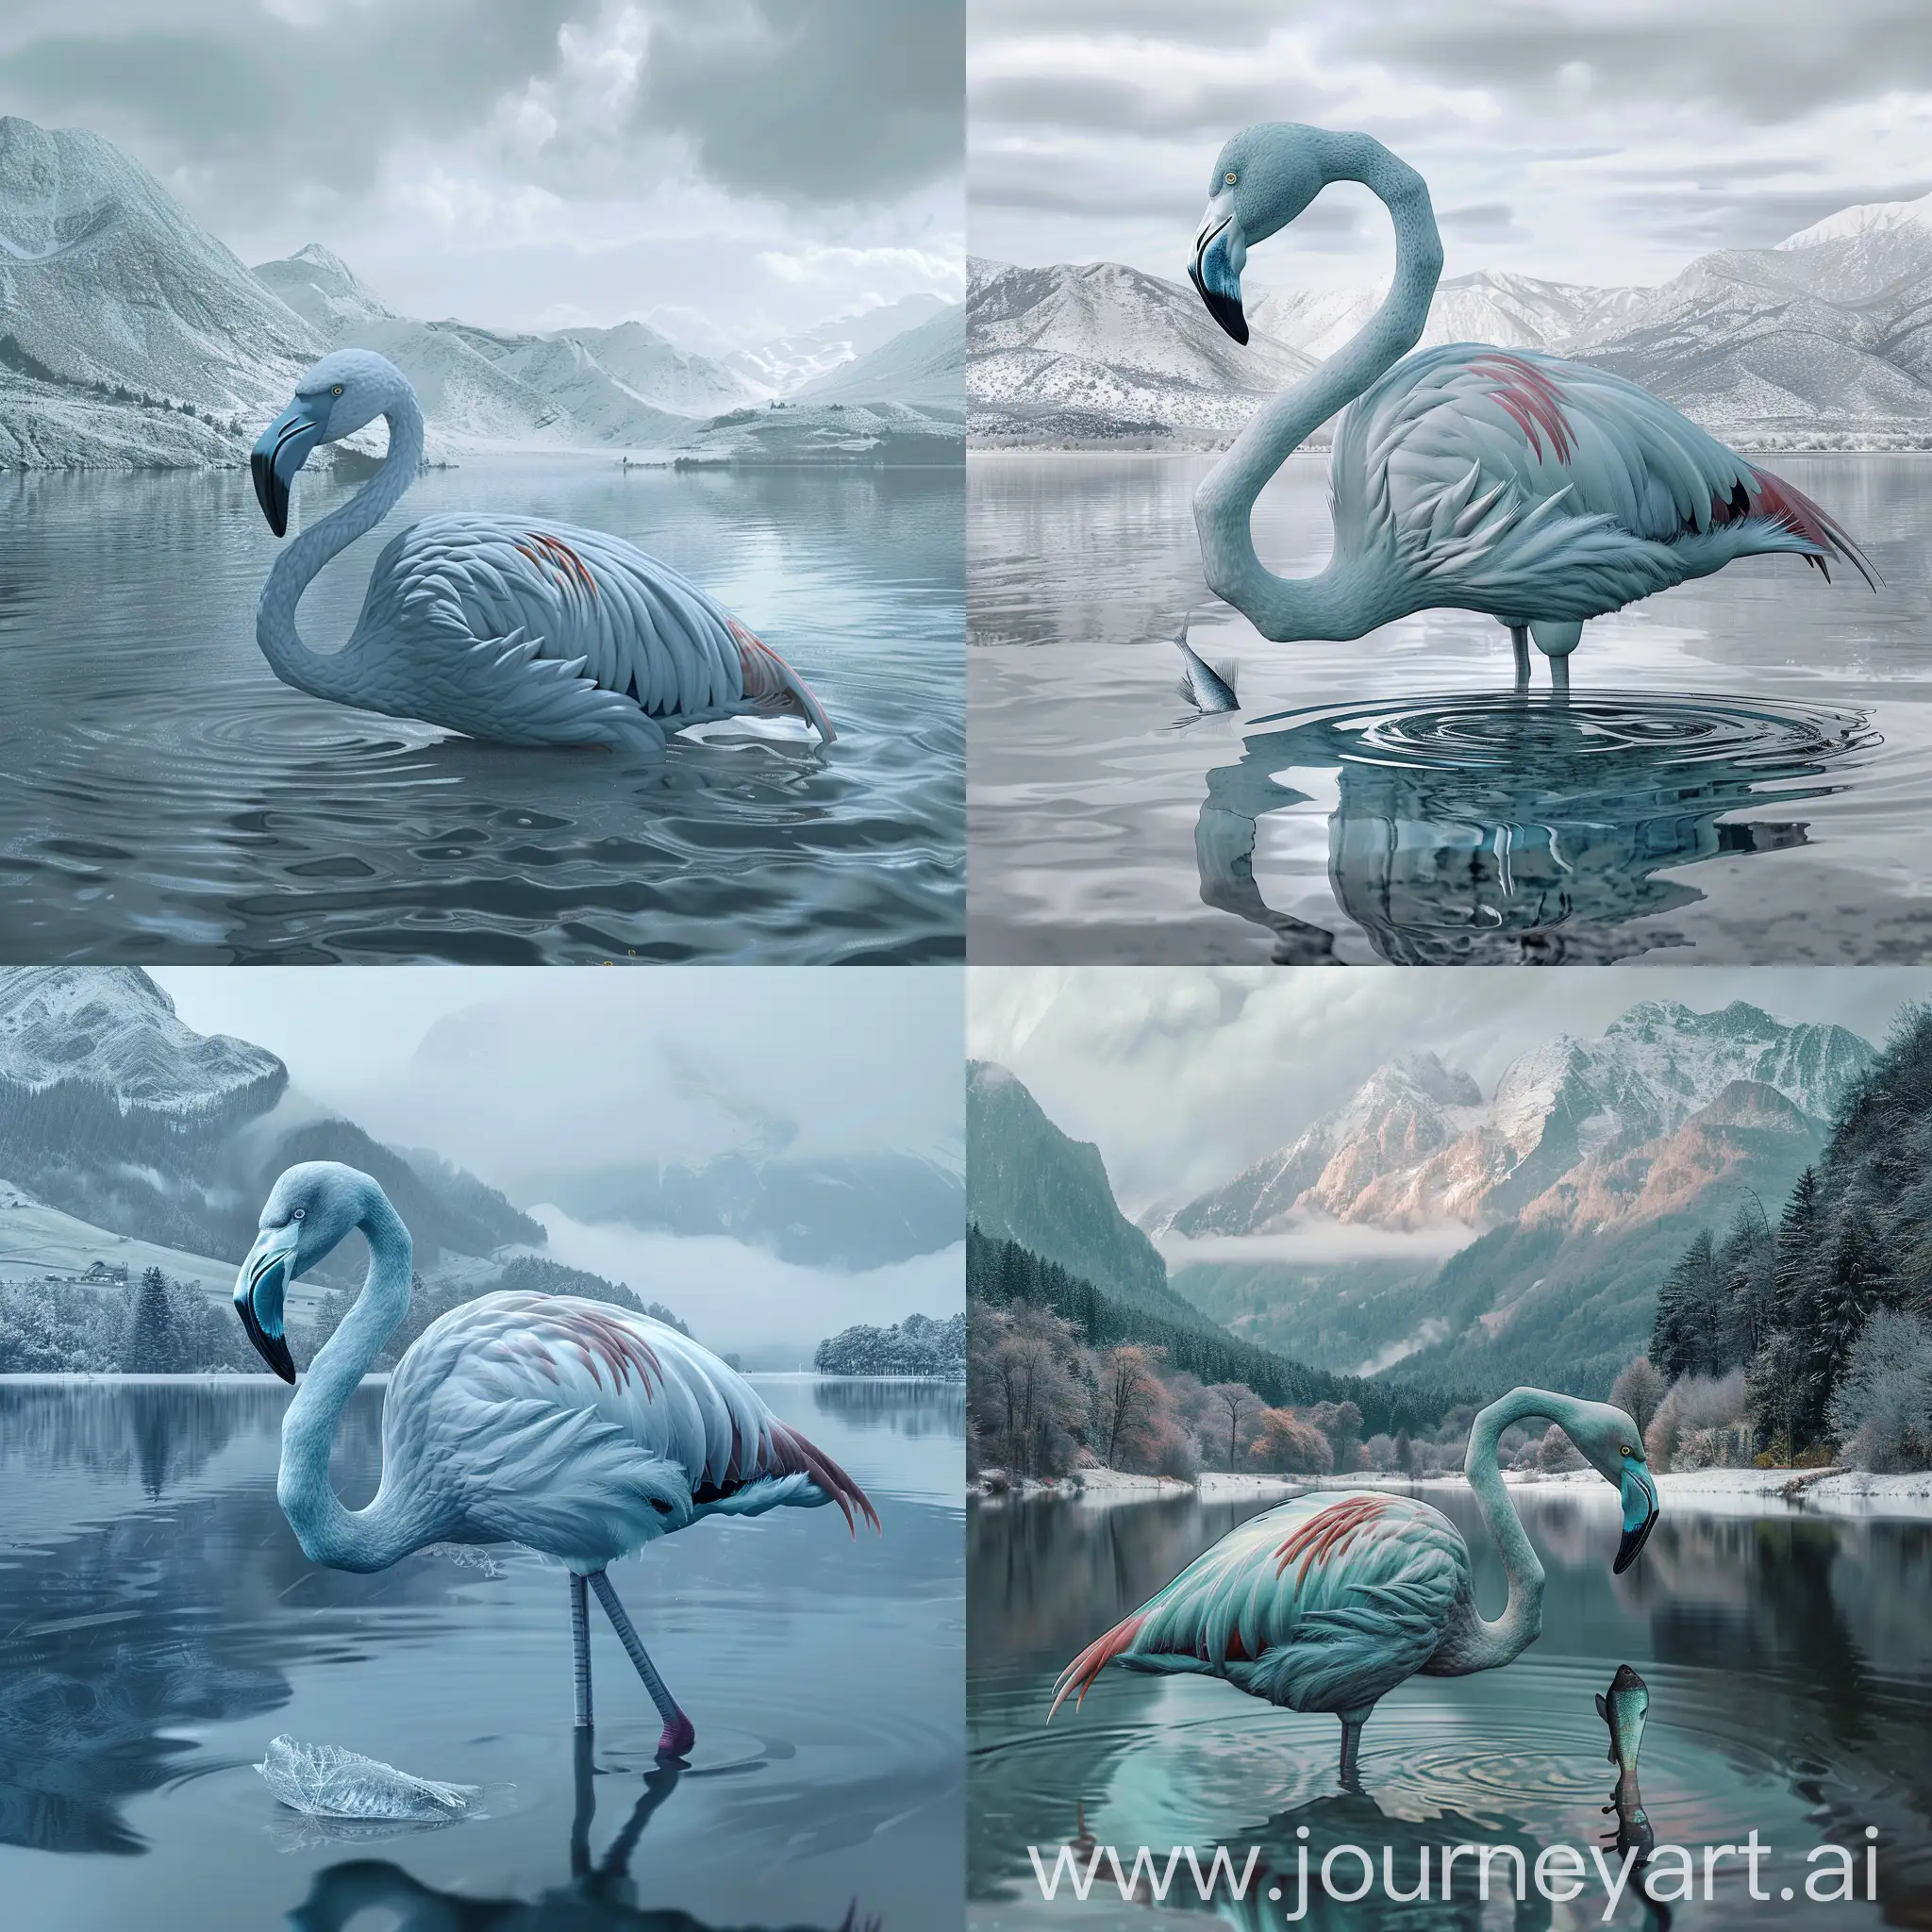 Photorealistic, light-blue flamingo, dark-blue beak standing in a mountain lake in winter searching for fish